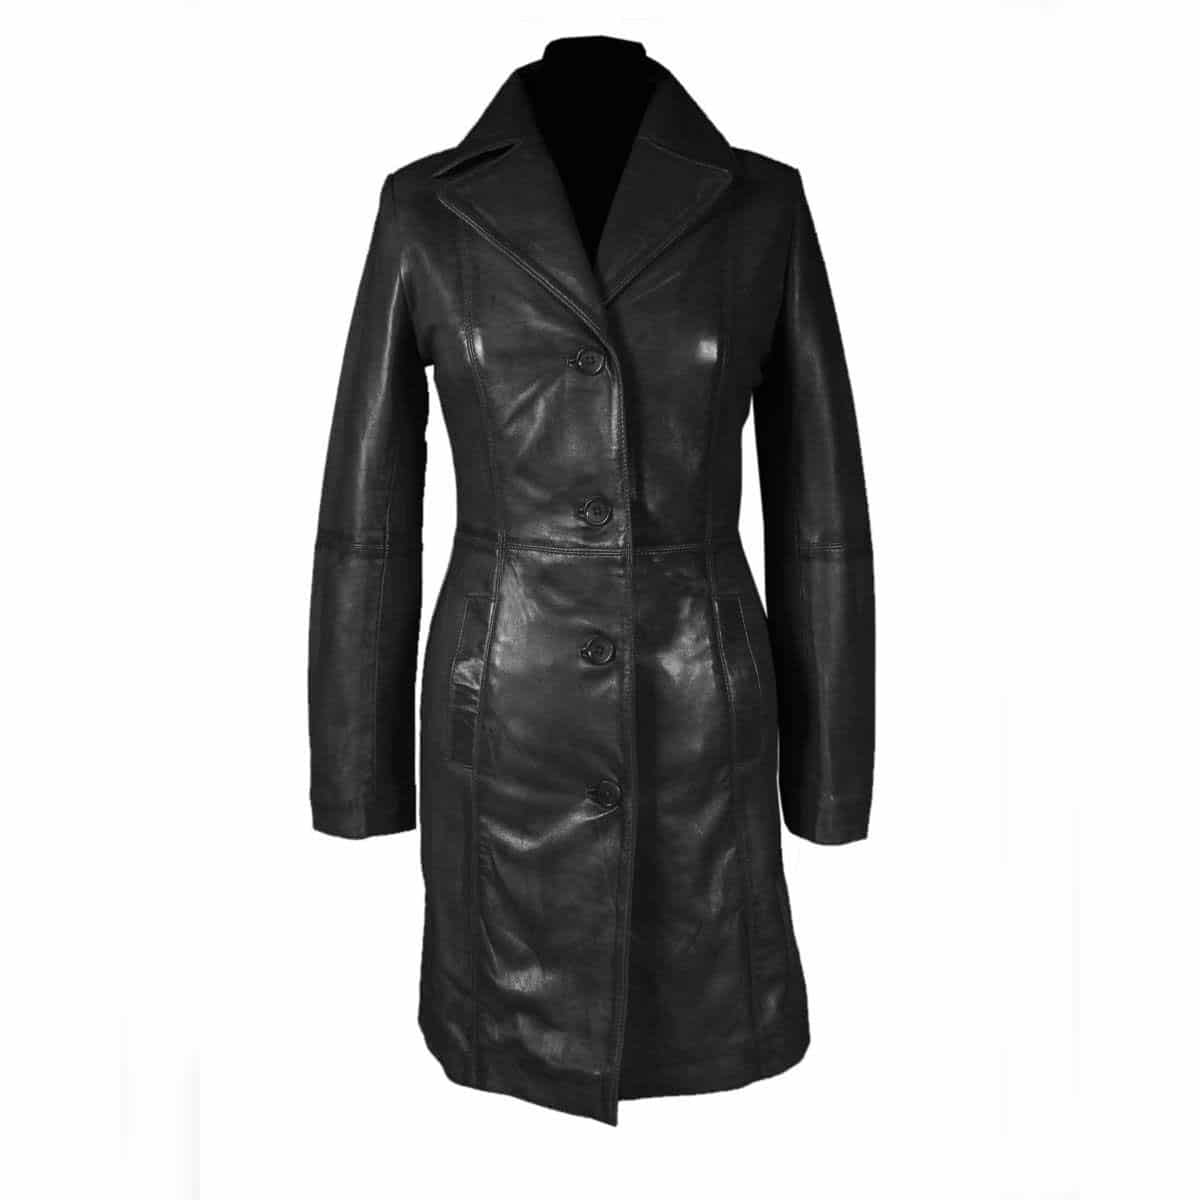 Ladies Black Cow Leather Steampunk Goth Style Trench Coat - T16 - BLK